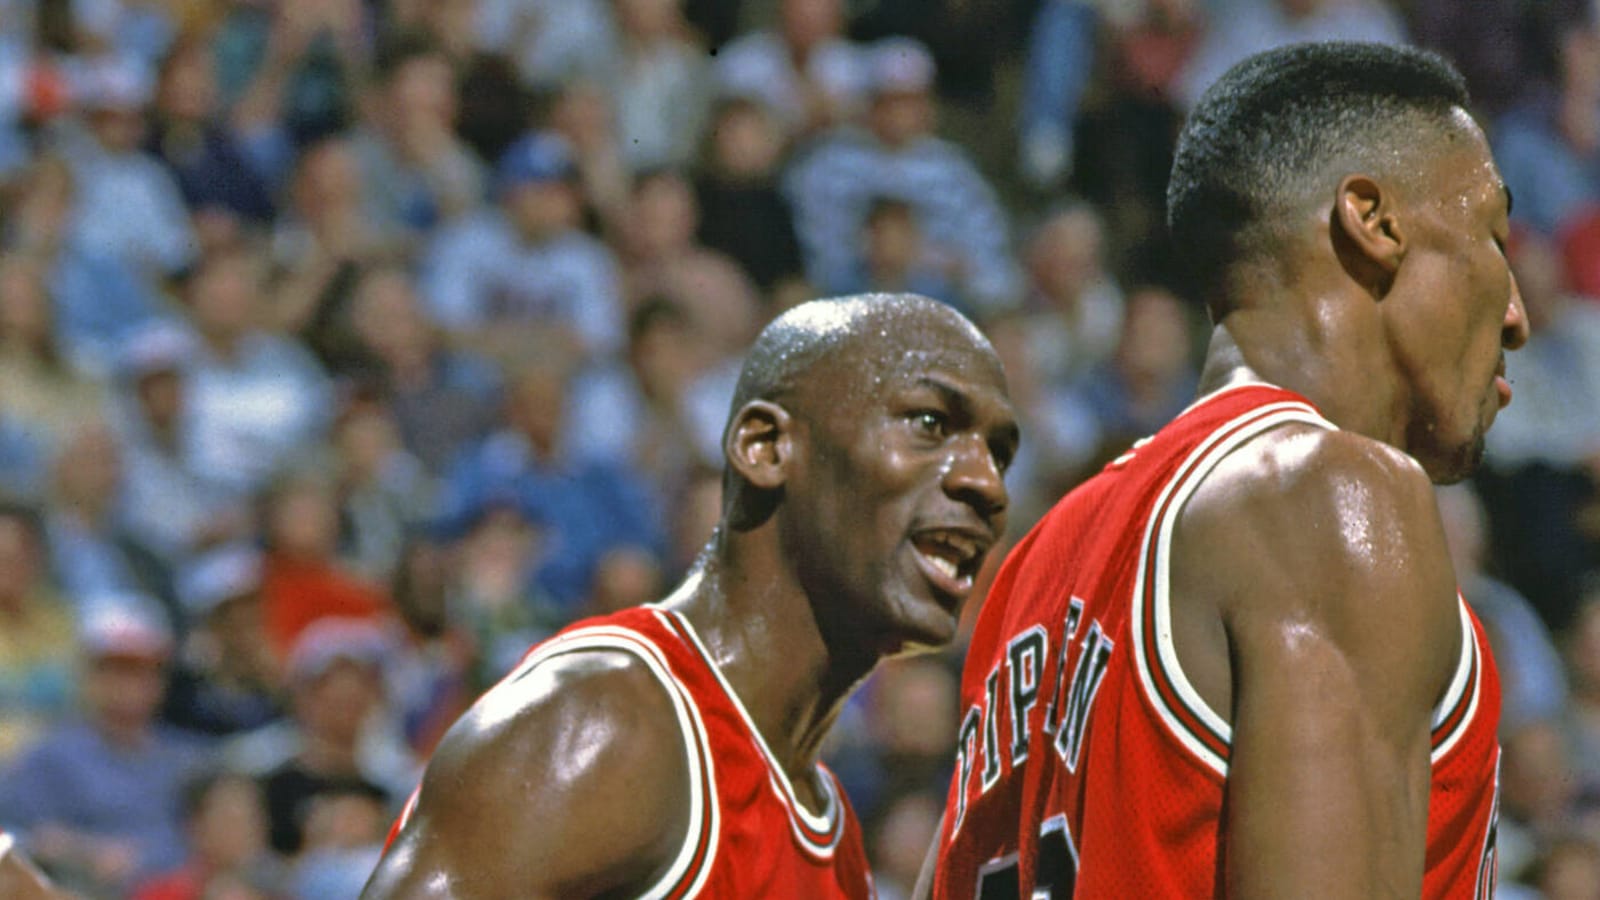 Scottie Pippen Ripped Michael Jordan For How ‘The Last Dance’ Docuseries Turned Out: ‘He Couldn’t Have Been More Condescending If He Tried’